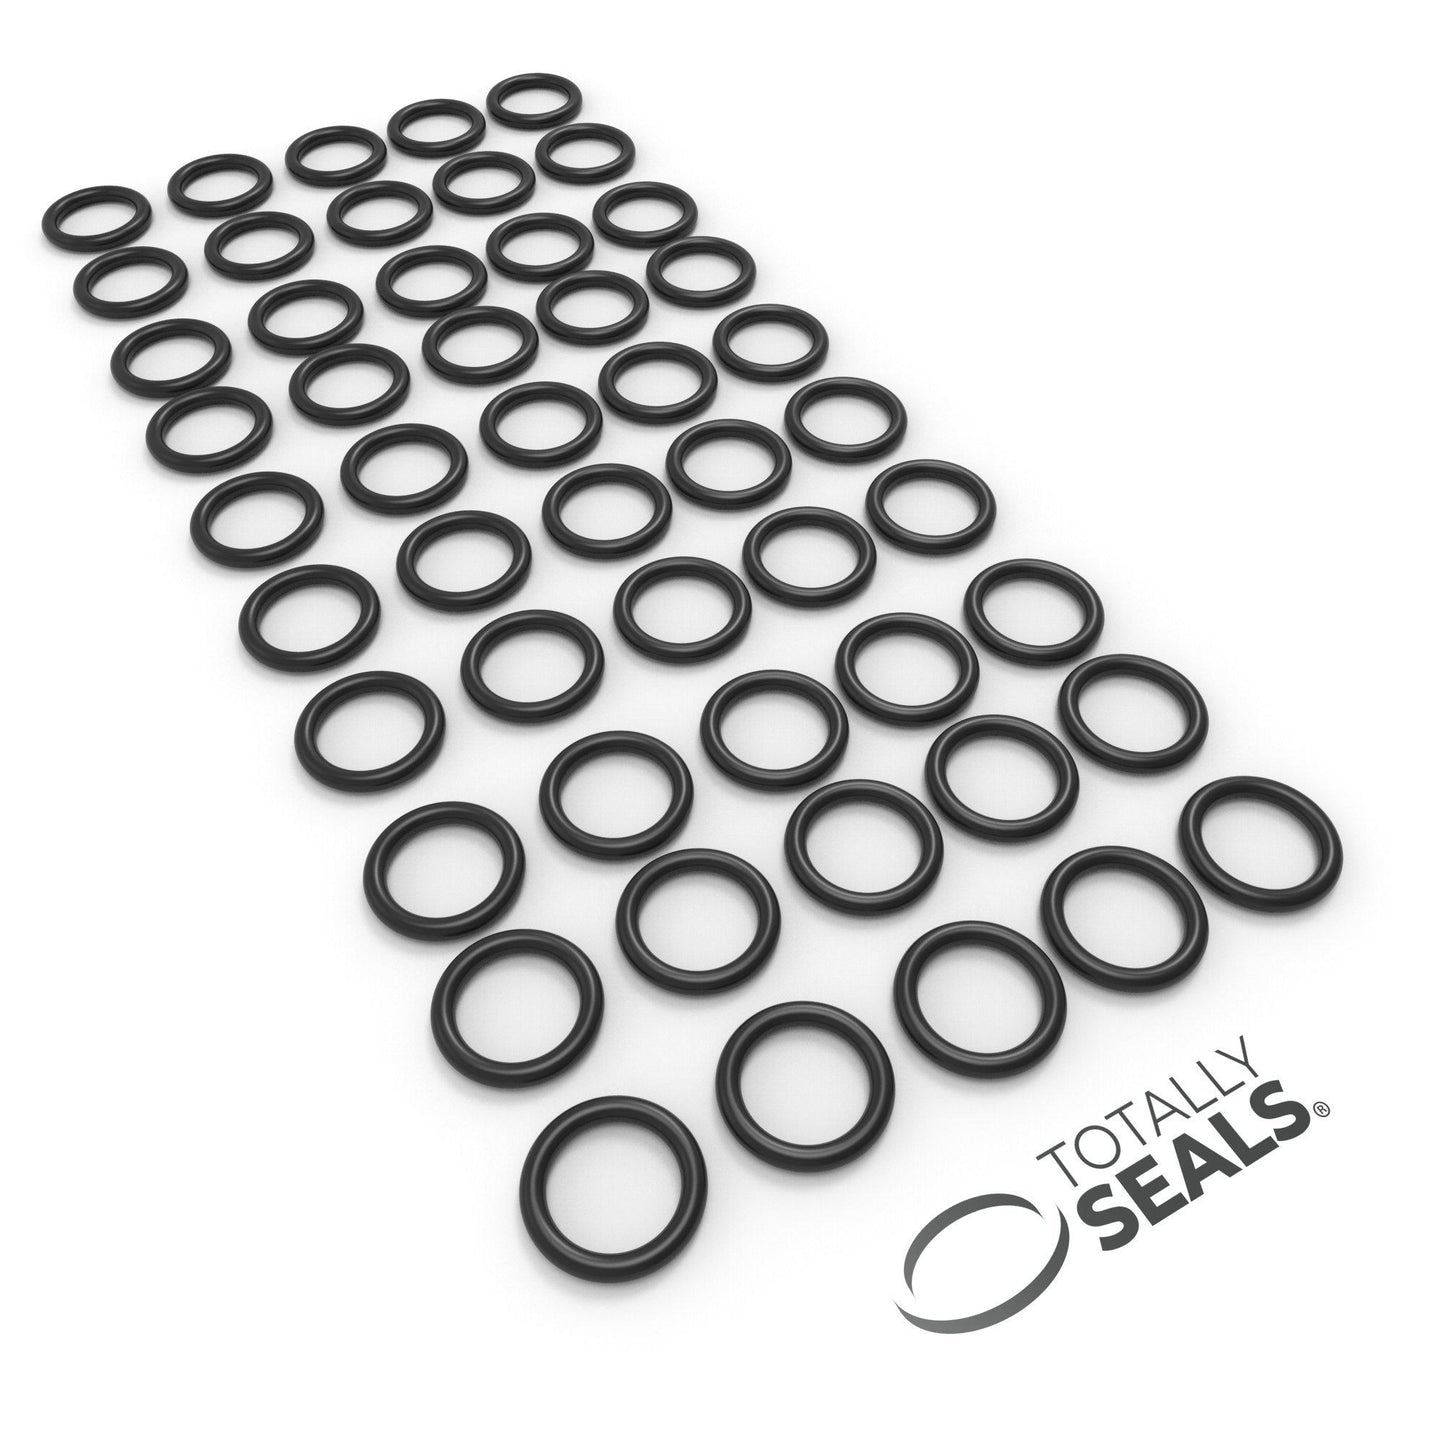 37mm x 2mm (41mm OD) Nitrile O-Rings - Totally Seals®